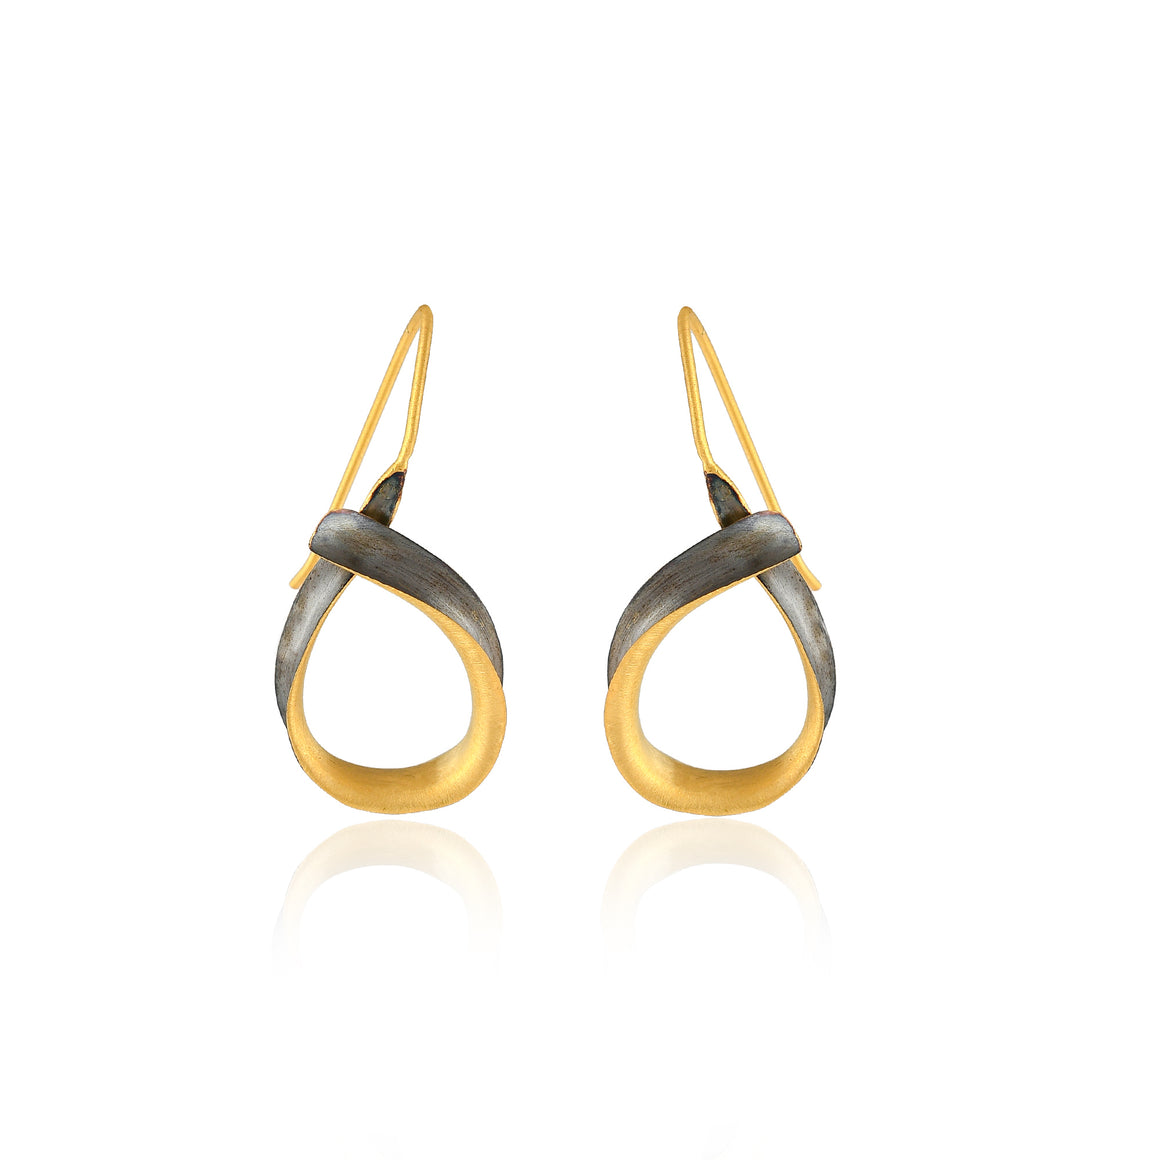 Rhodium and Gold Twisted Hoop Earrings